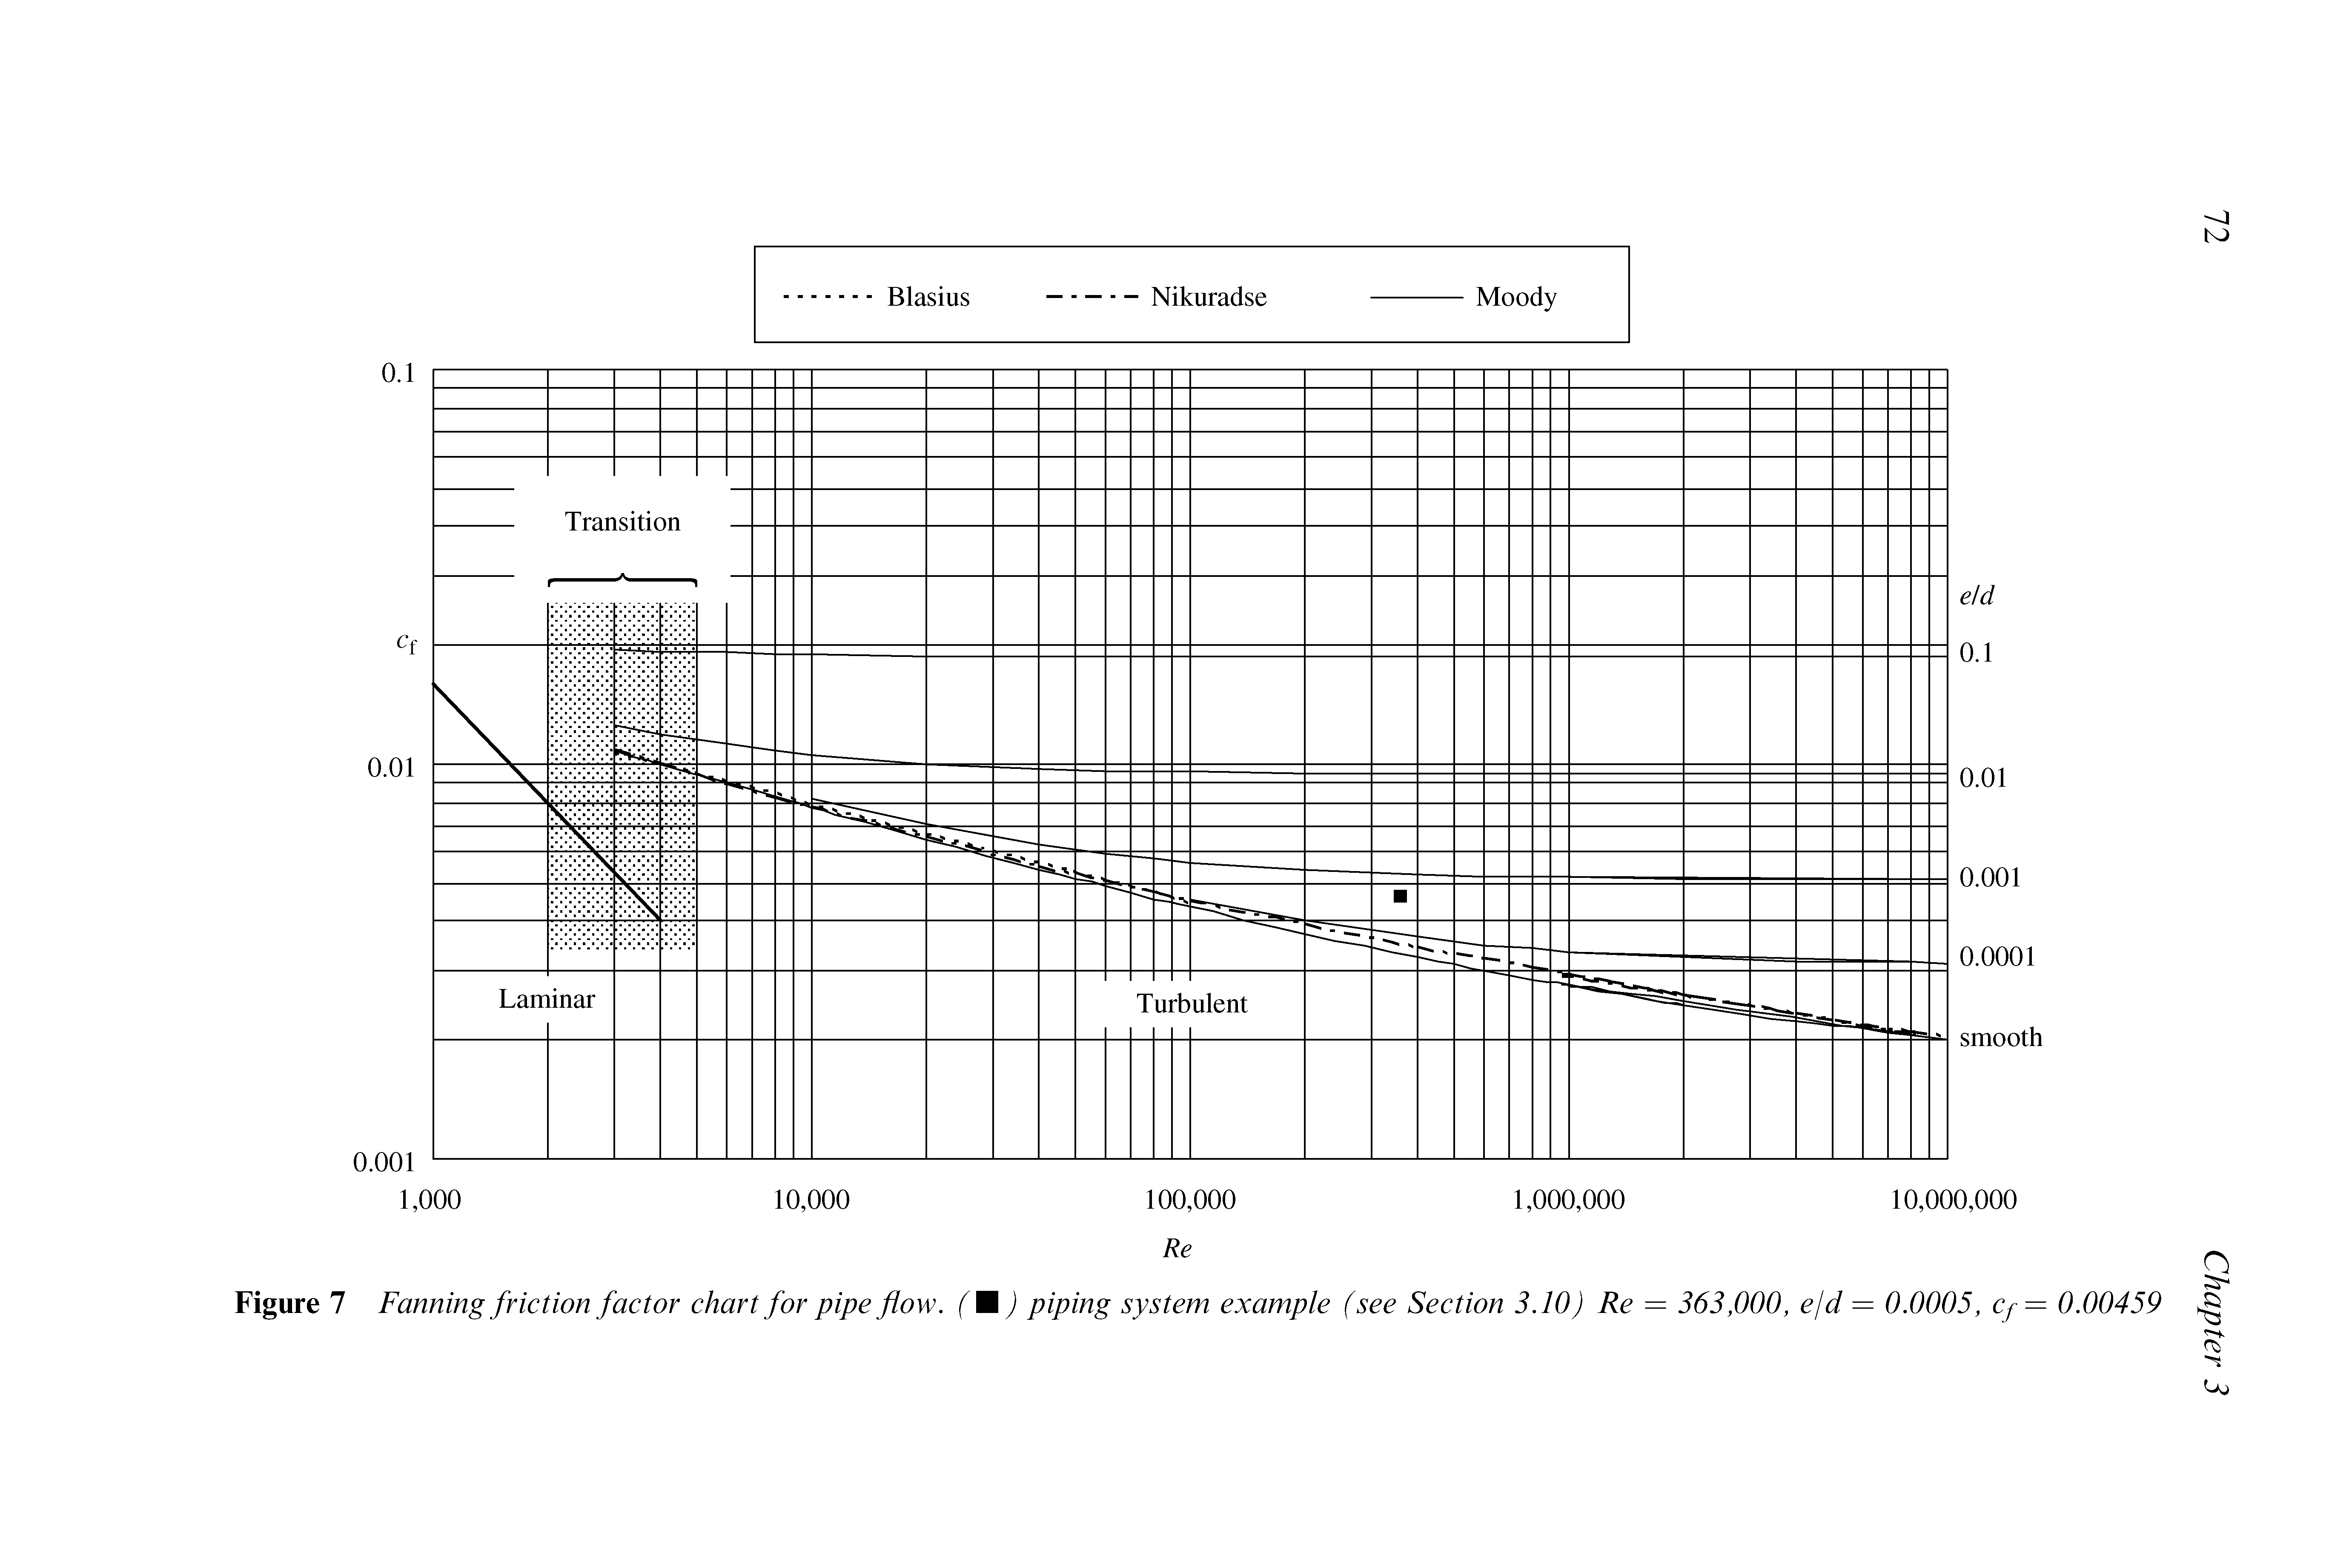 Figure 7 Fanning friction factor chart for pipe flow. (M) piping system example (see Section 3.10) Re = 363,000, e/d = 0.0005, cp =...